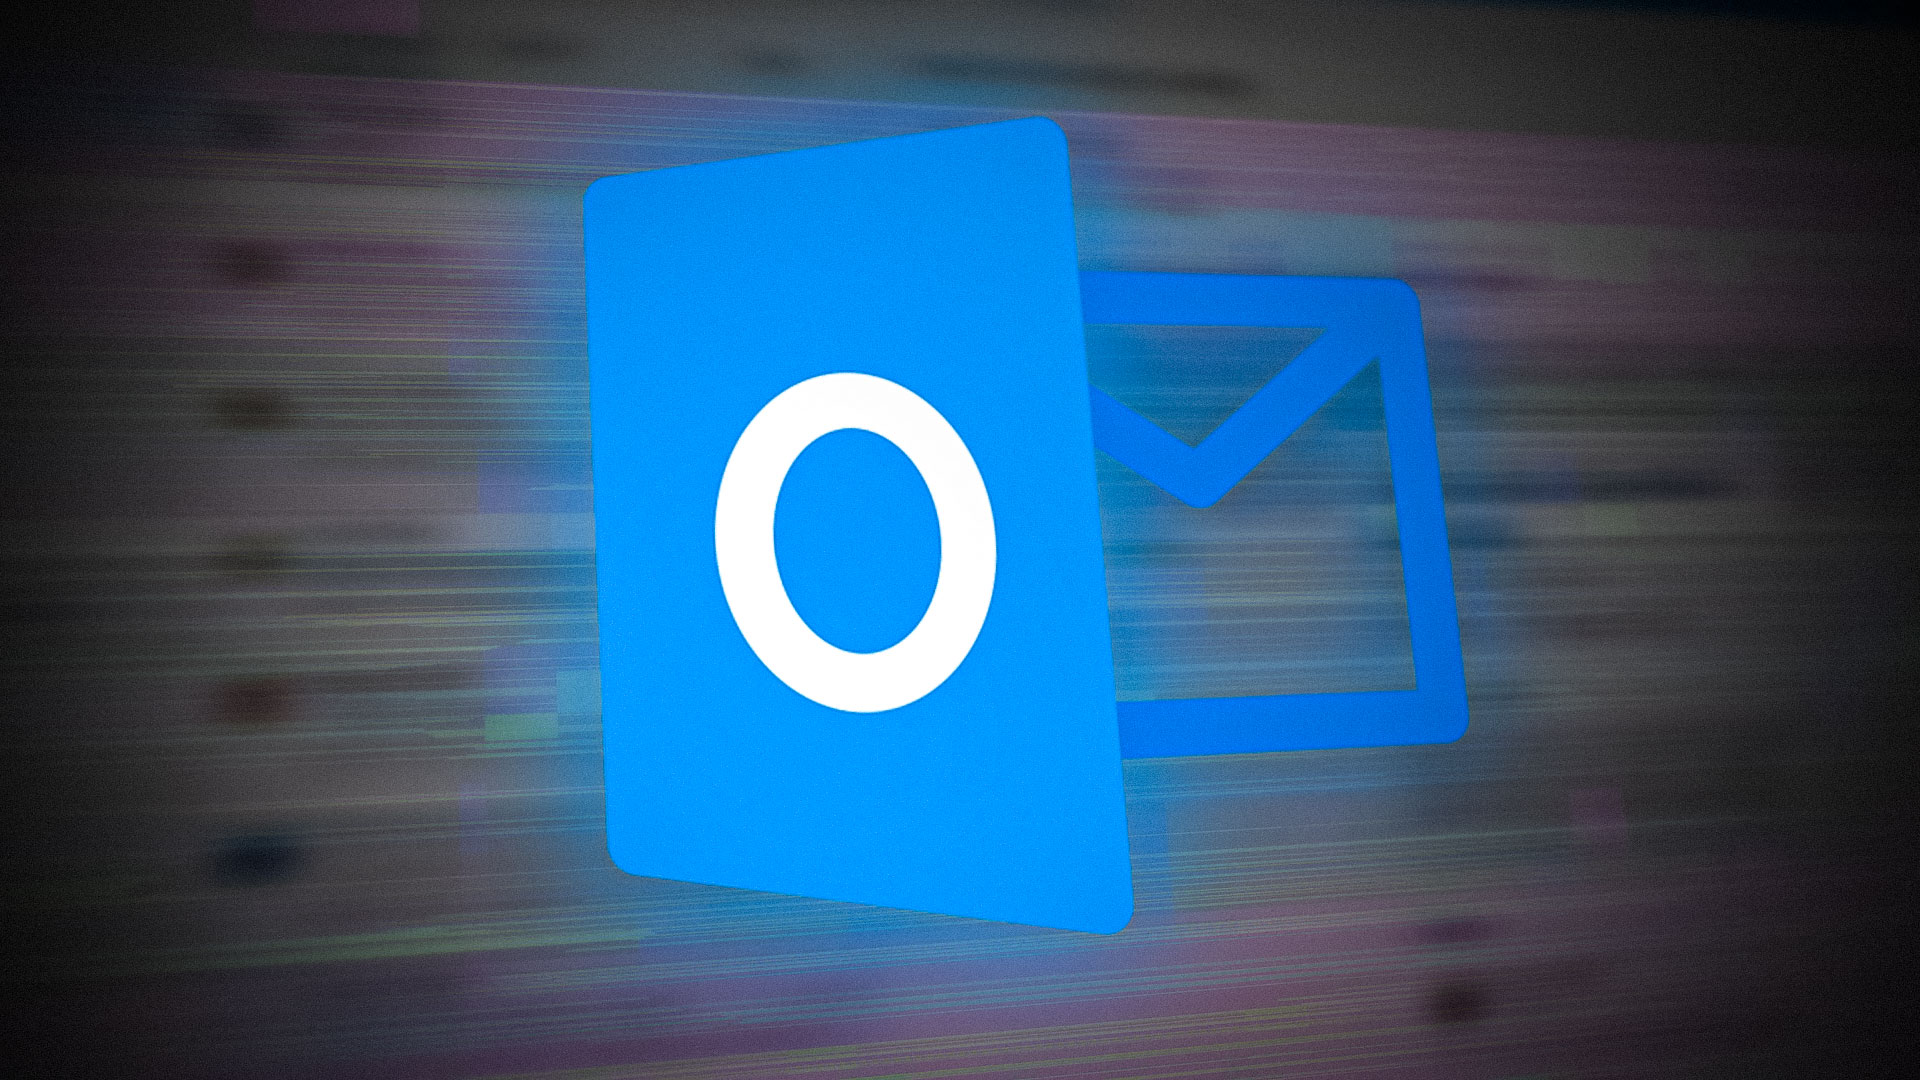 Microsoft Outlook crashes on startup